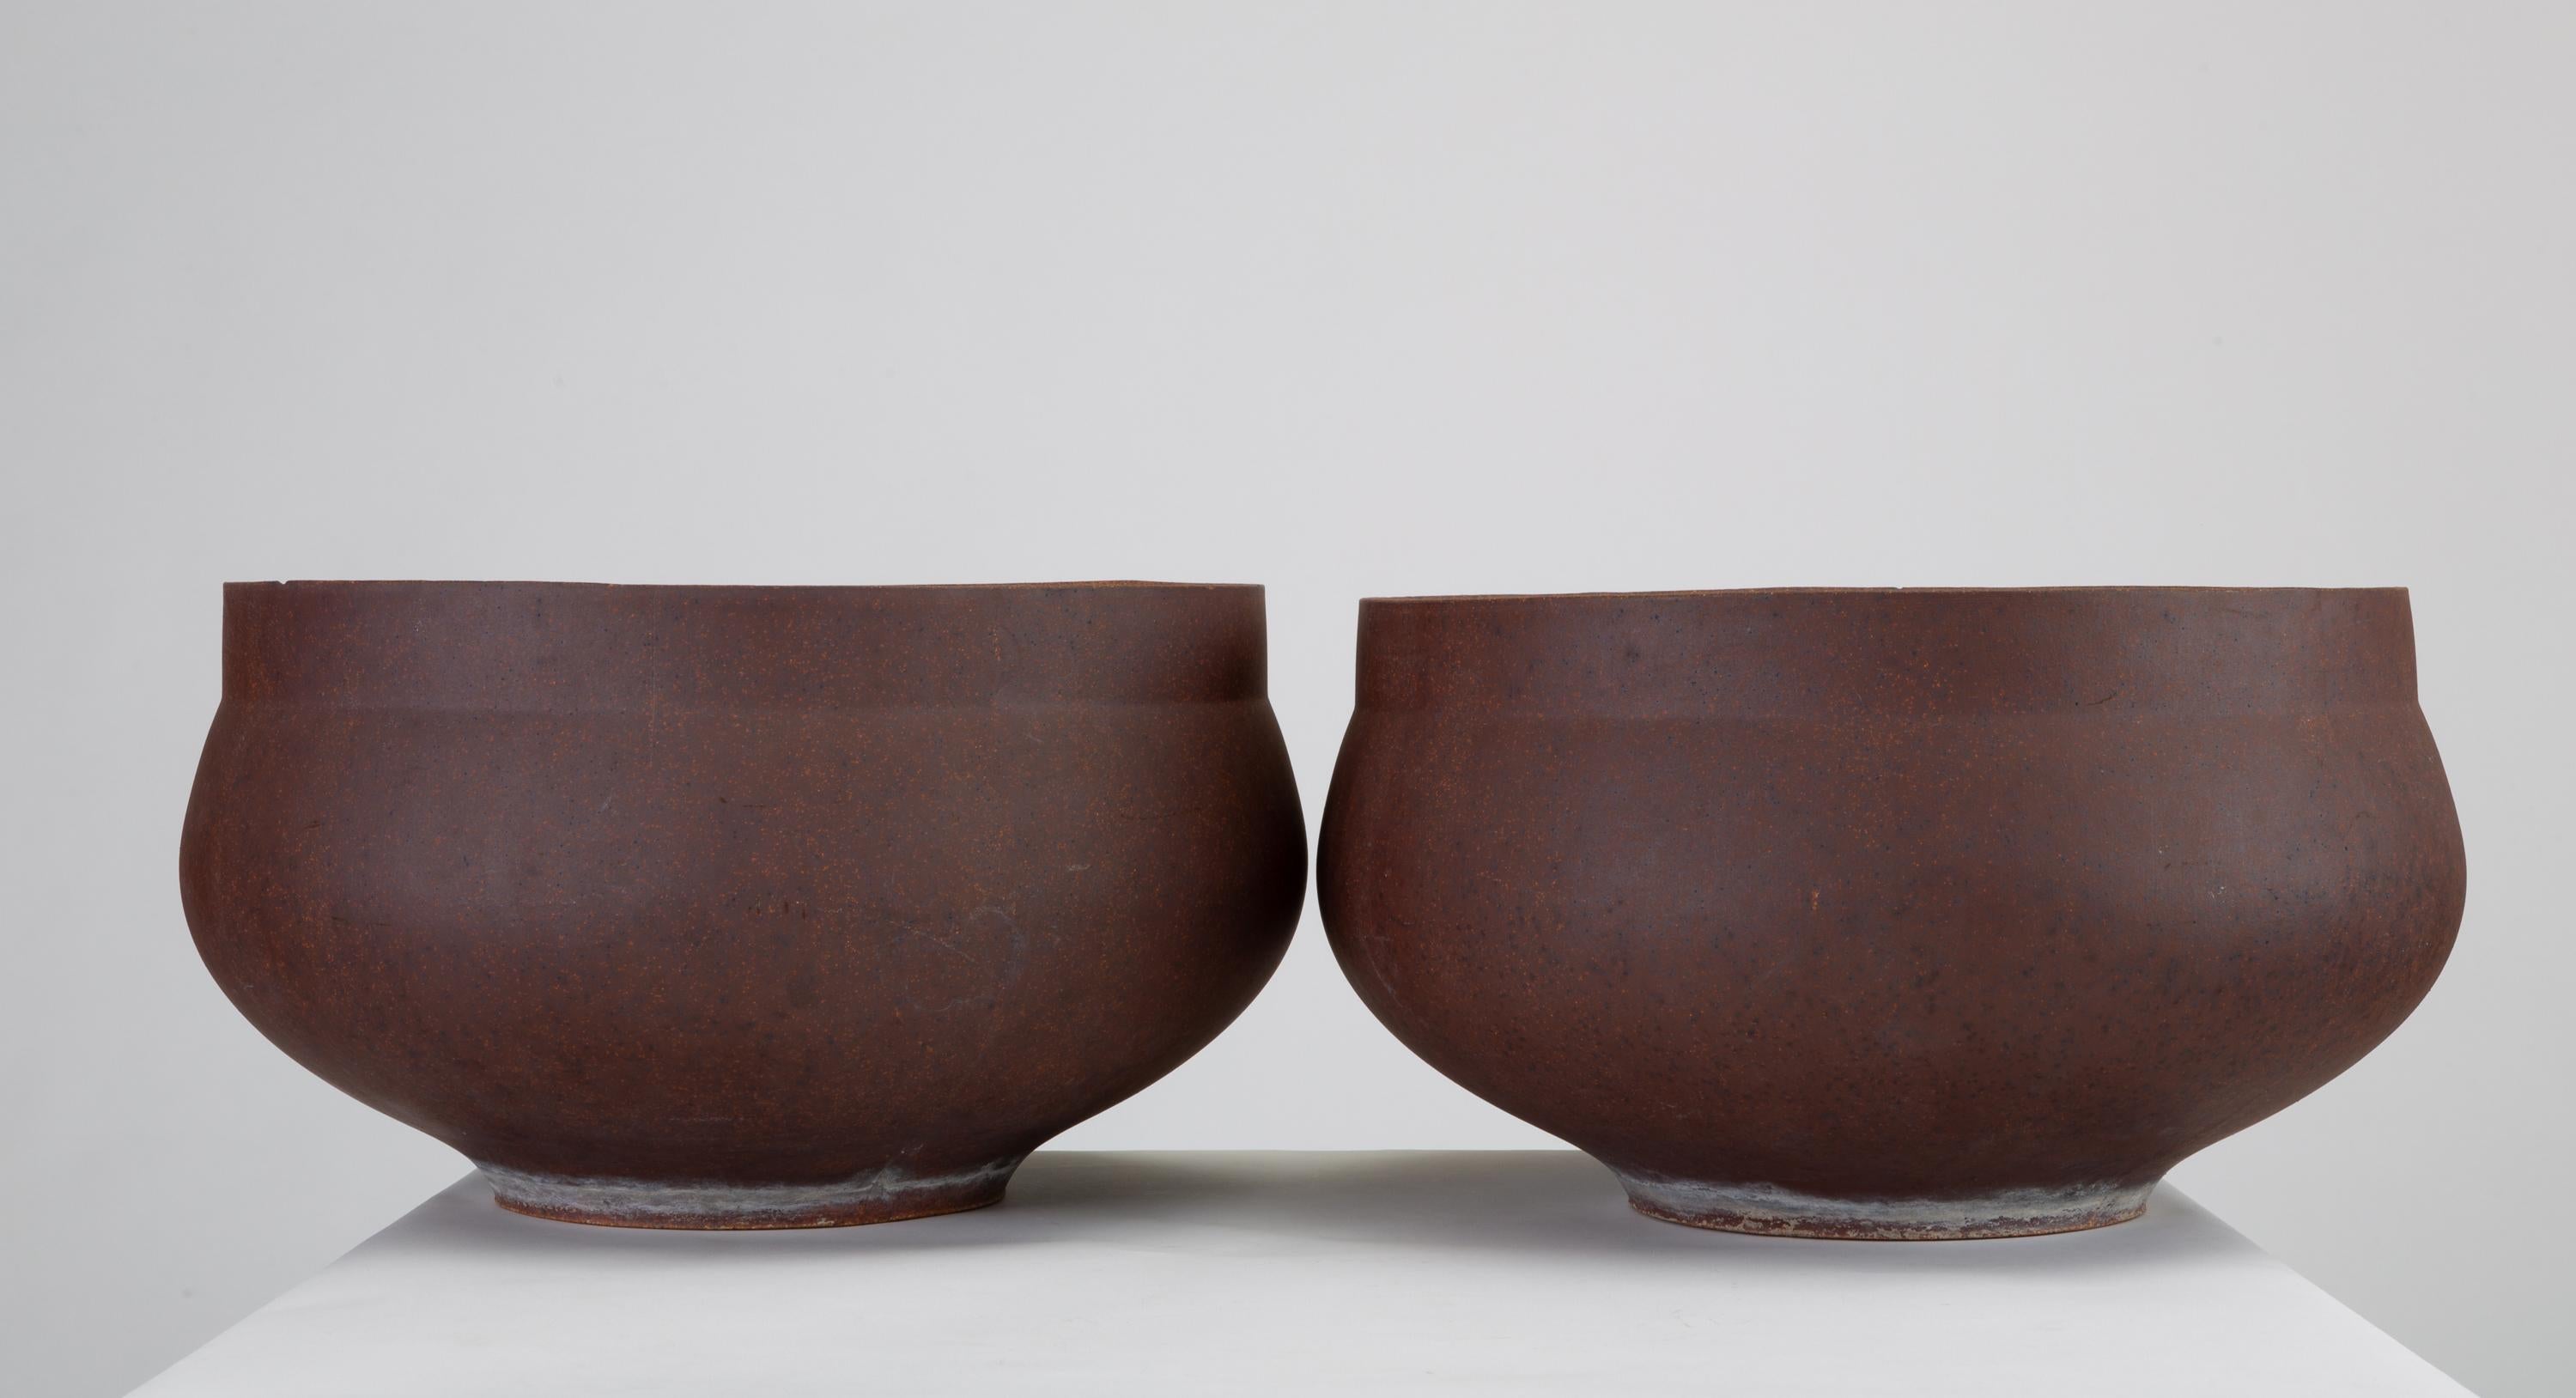 American Pair of David Cressey Pro/Artisan Bowl Planters for Architectural Pottery